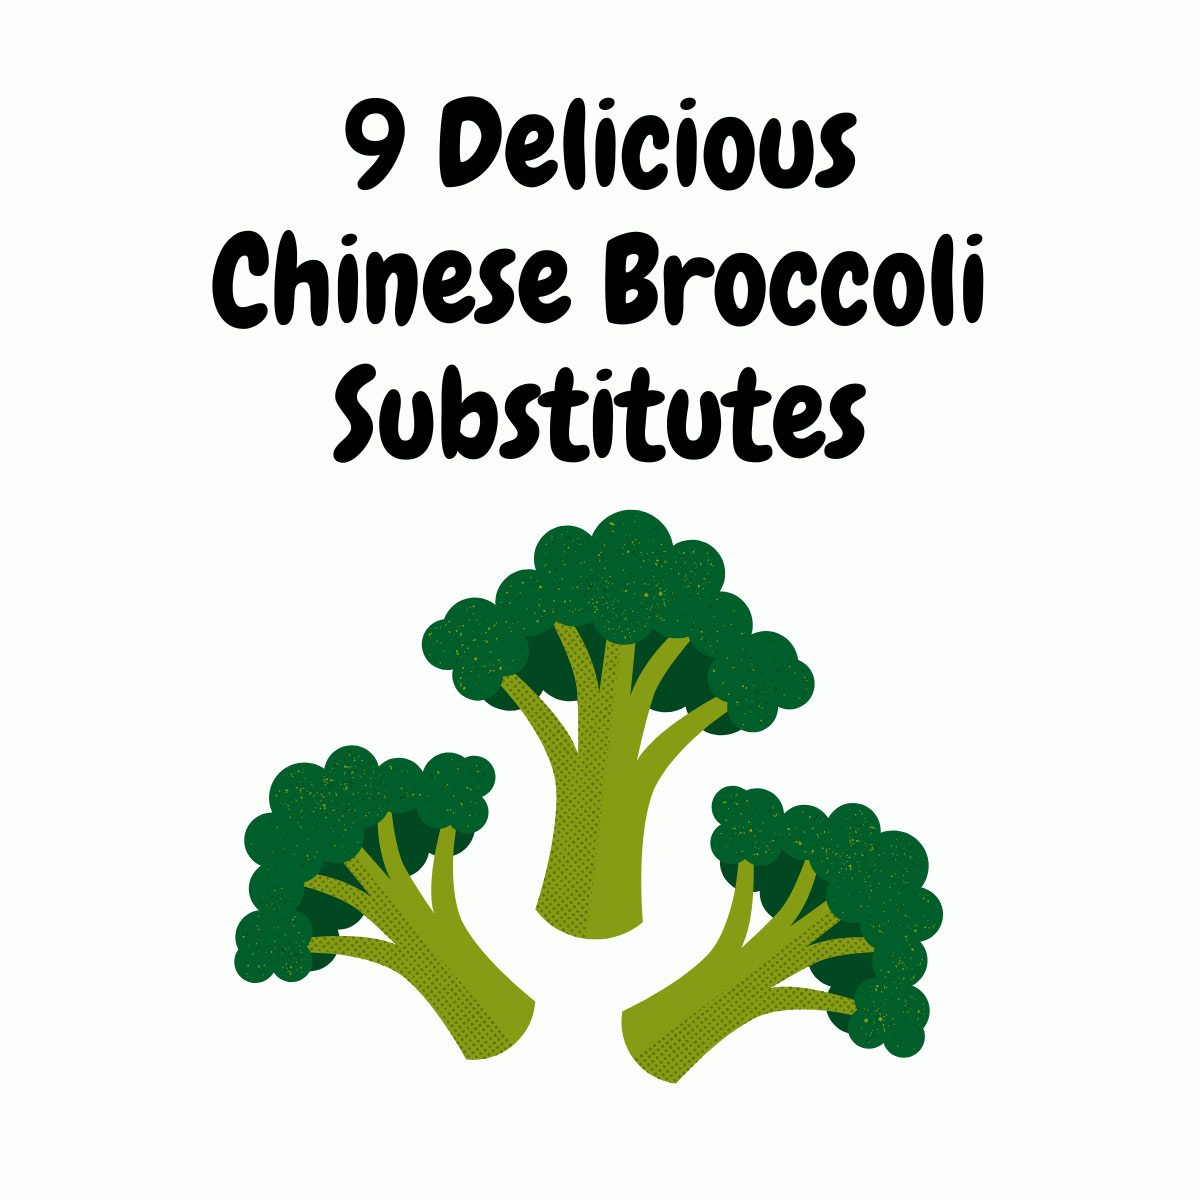 Chinese Broccoli Substitutes featured image | Girl Meets Food